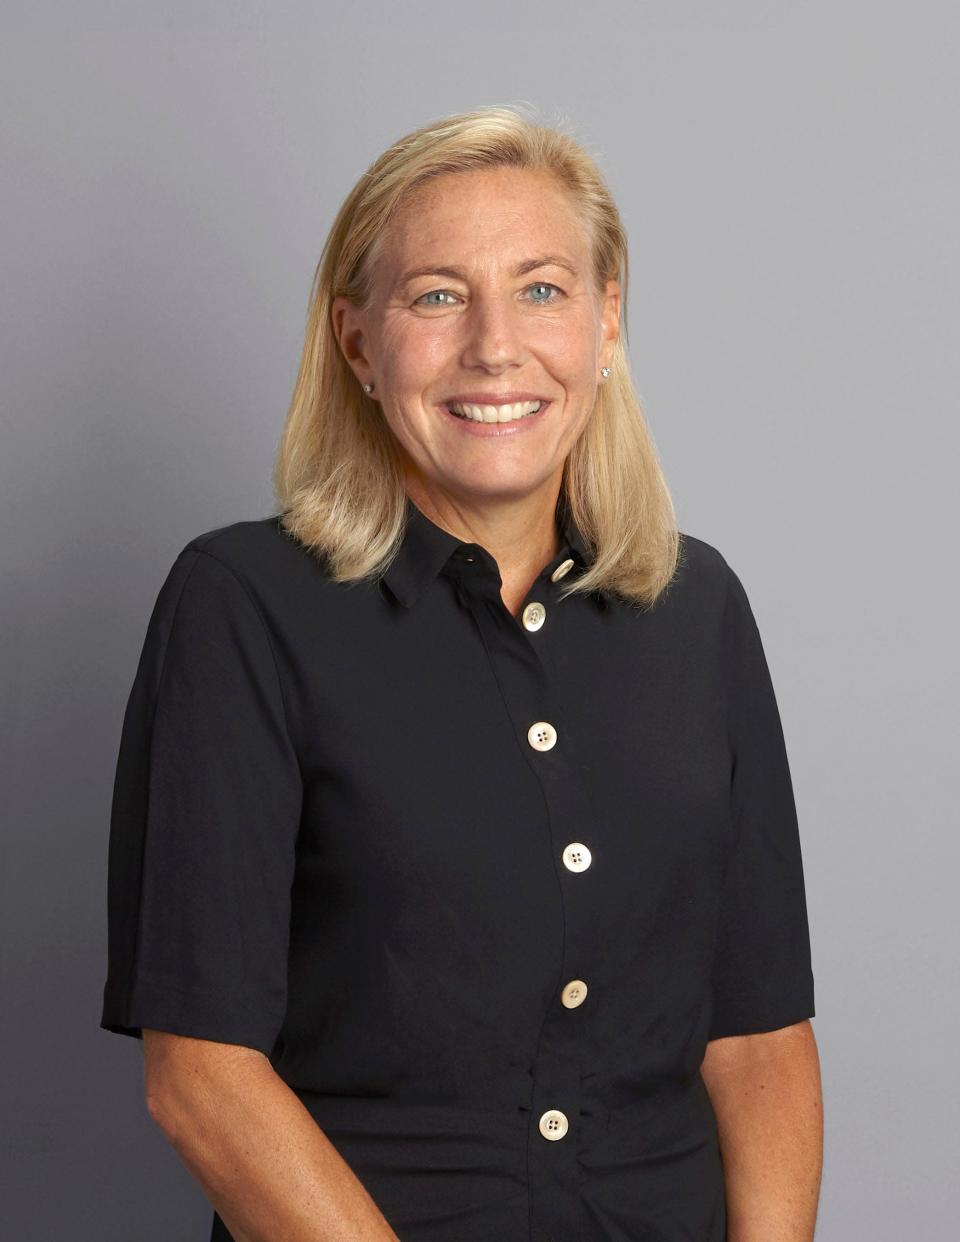 Joanne Crevoiserat, 58, has joined GM's board effective immediately. Crevoiserat is CEO&nbsp;of Tapestry, Inc.,&nbsp;a&nbsp;New York-based company that sells such&nbsp;luxury accessories as Coach, Kate Spade and Stuart Weitzman.